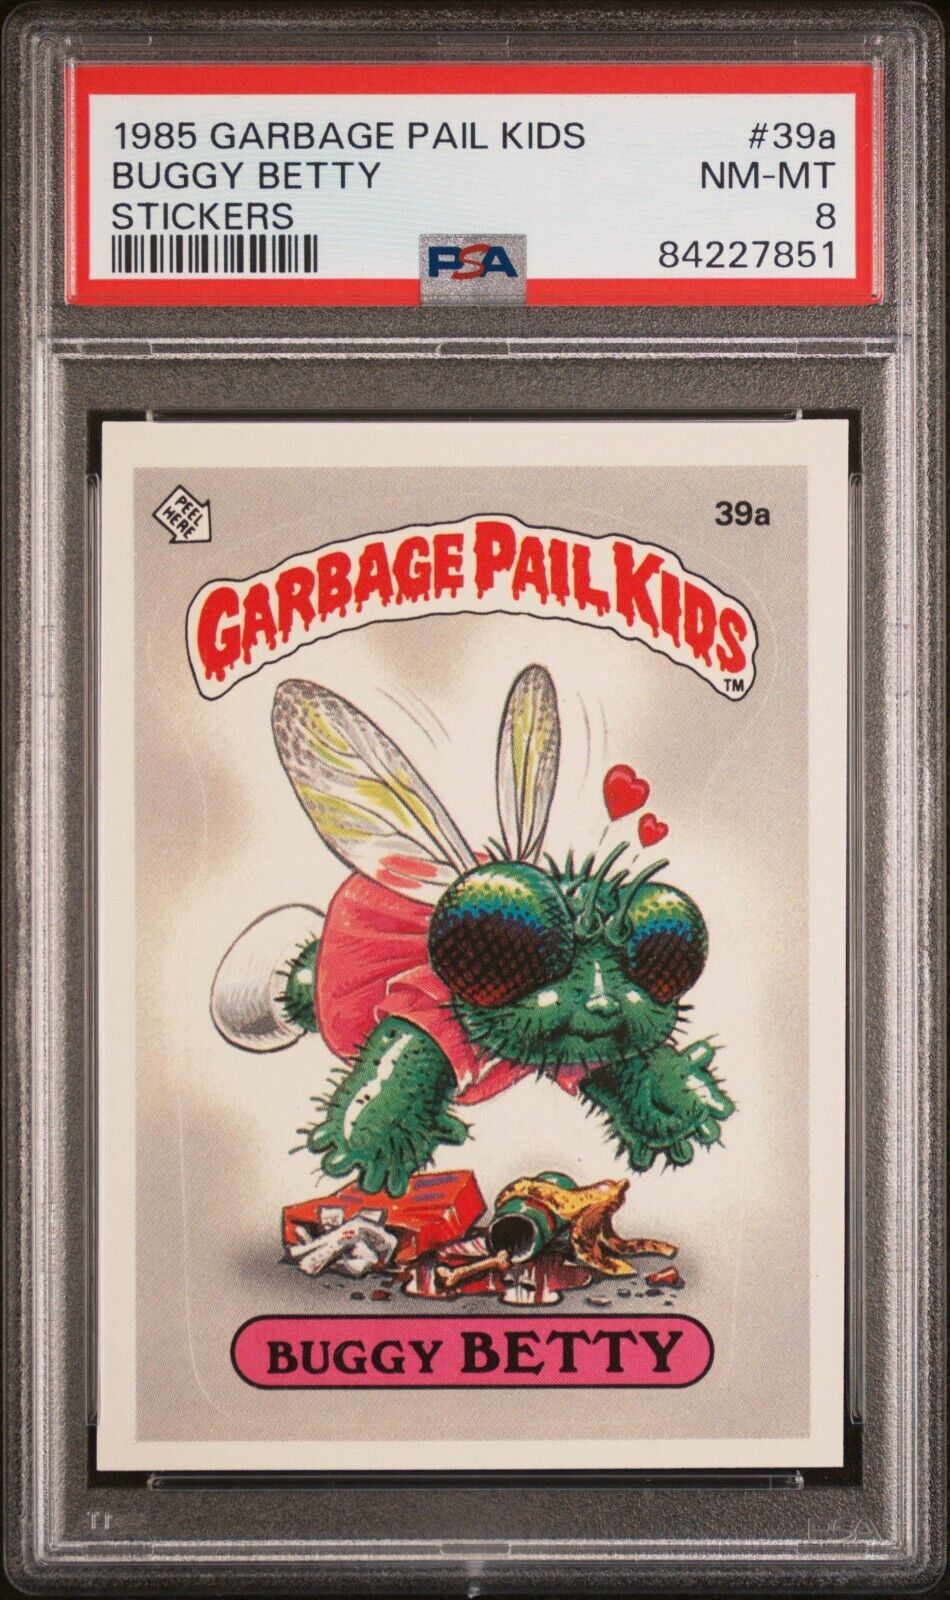 TWO STAR 2 ** 1985 Topps Garbage Pail Kids Series 1 OS1 Buggy Betty 39a PSA 8 NM